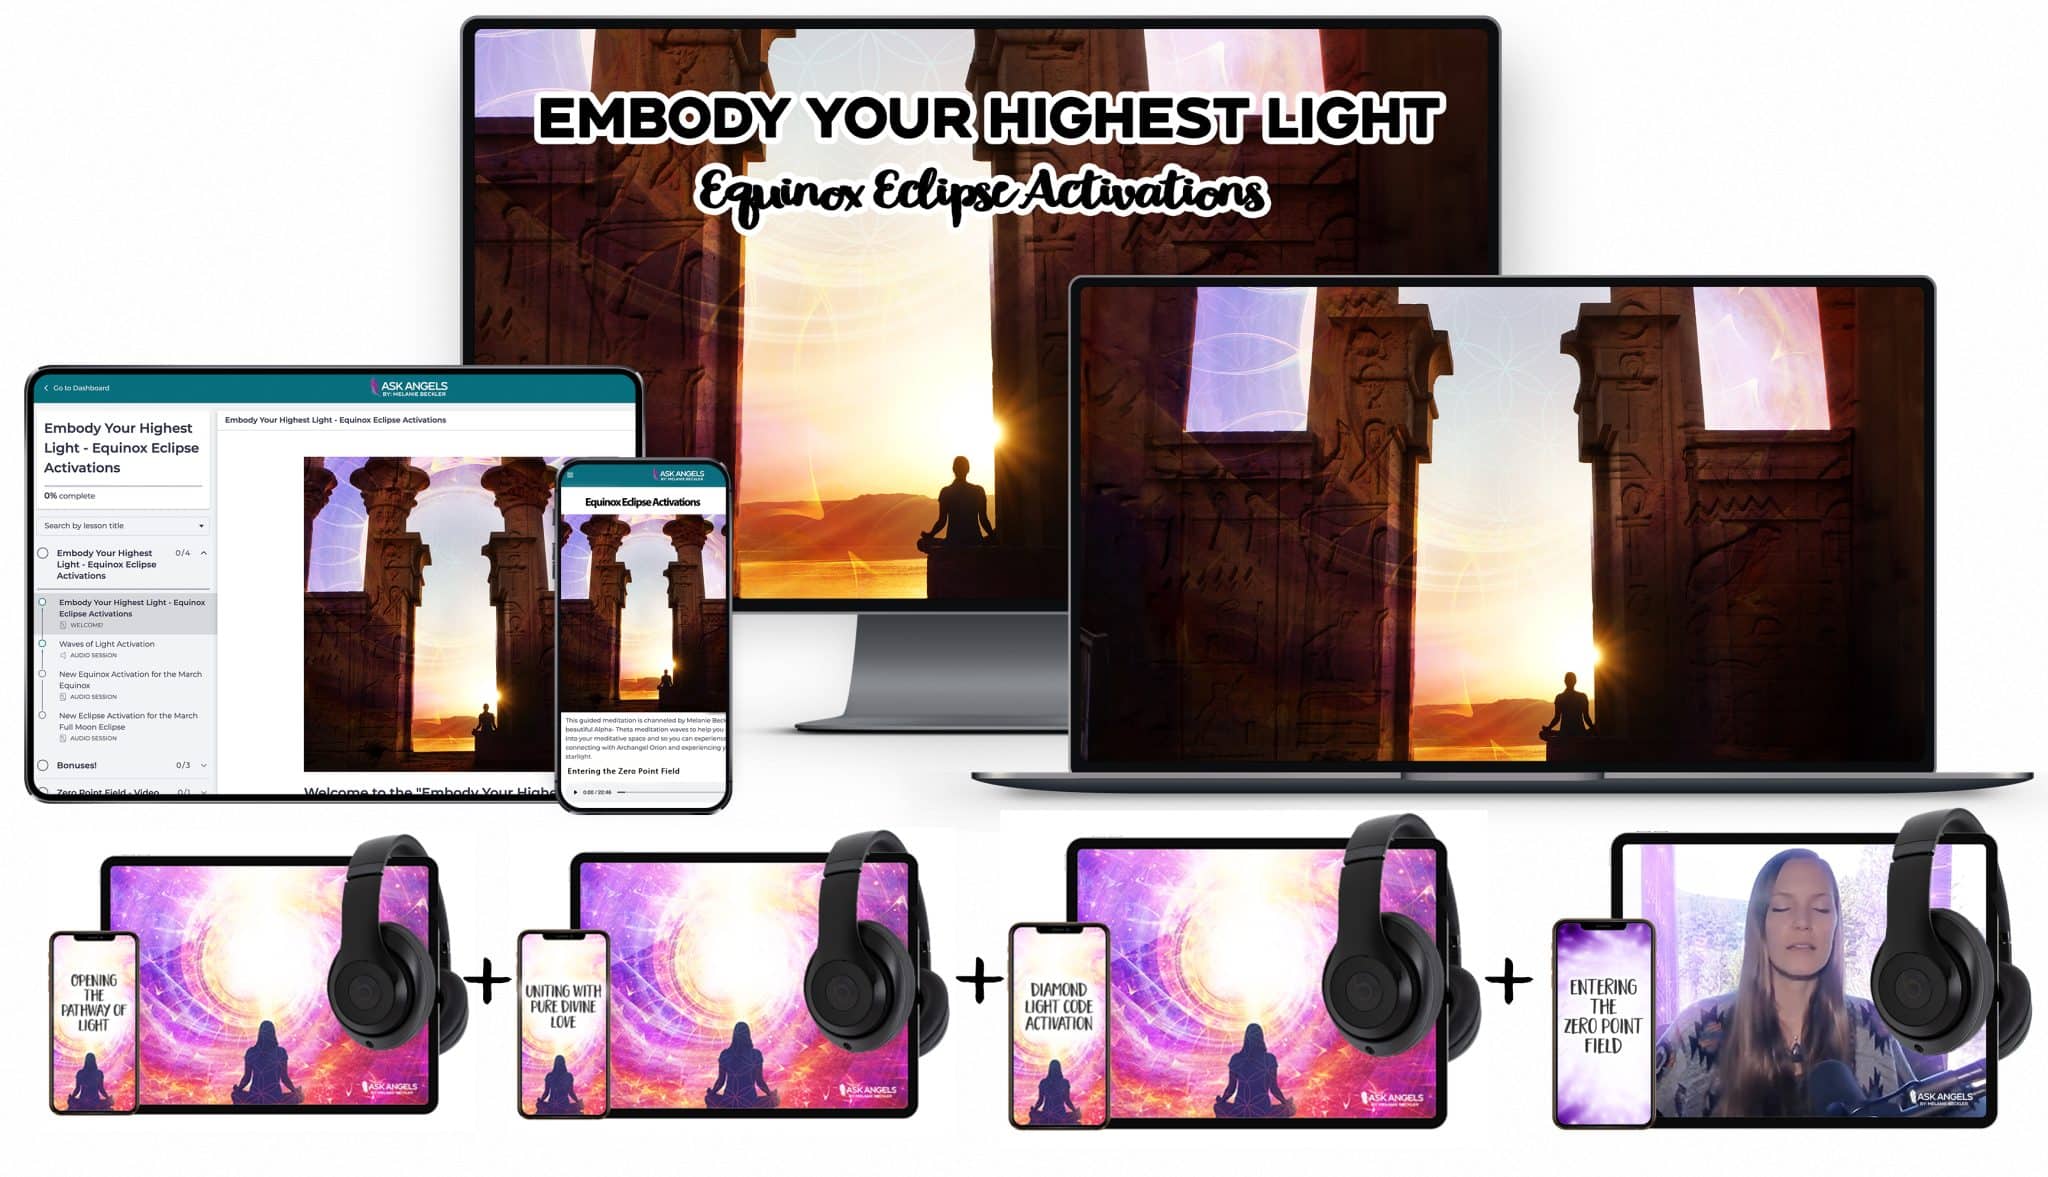 Introducing: The Embody Your Highest Light - Equinox Eclipse Activations